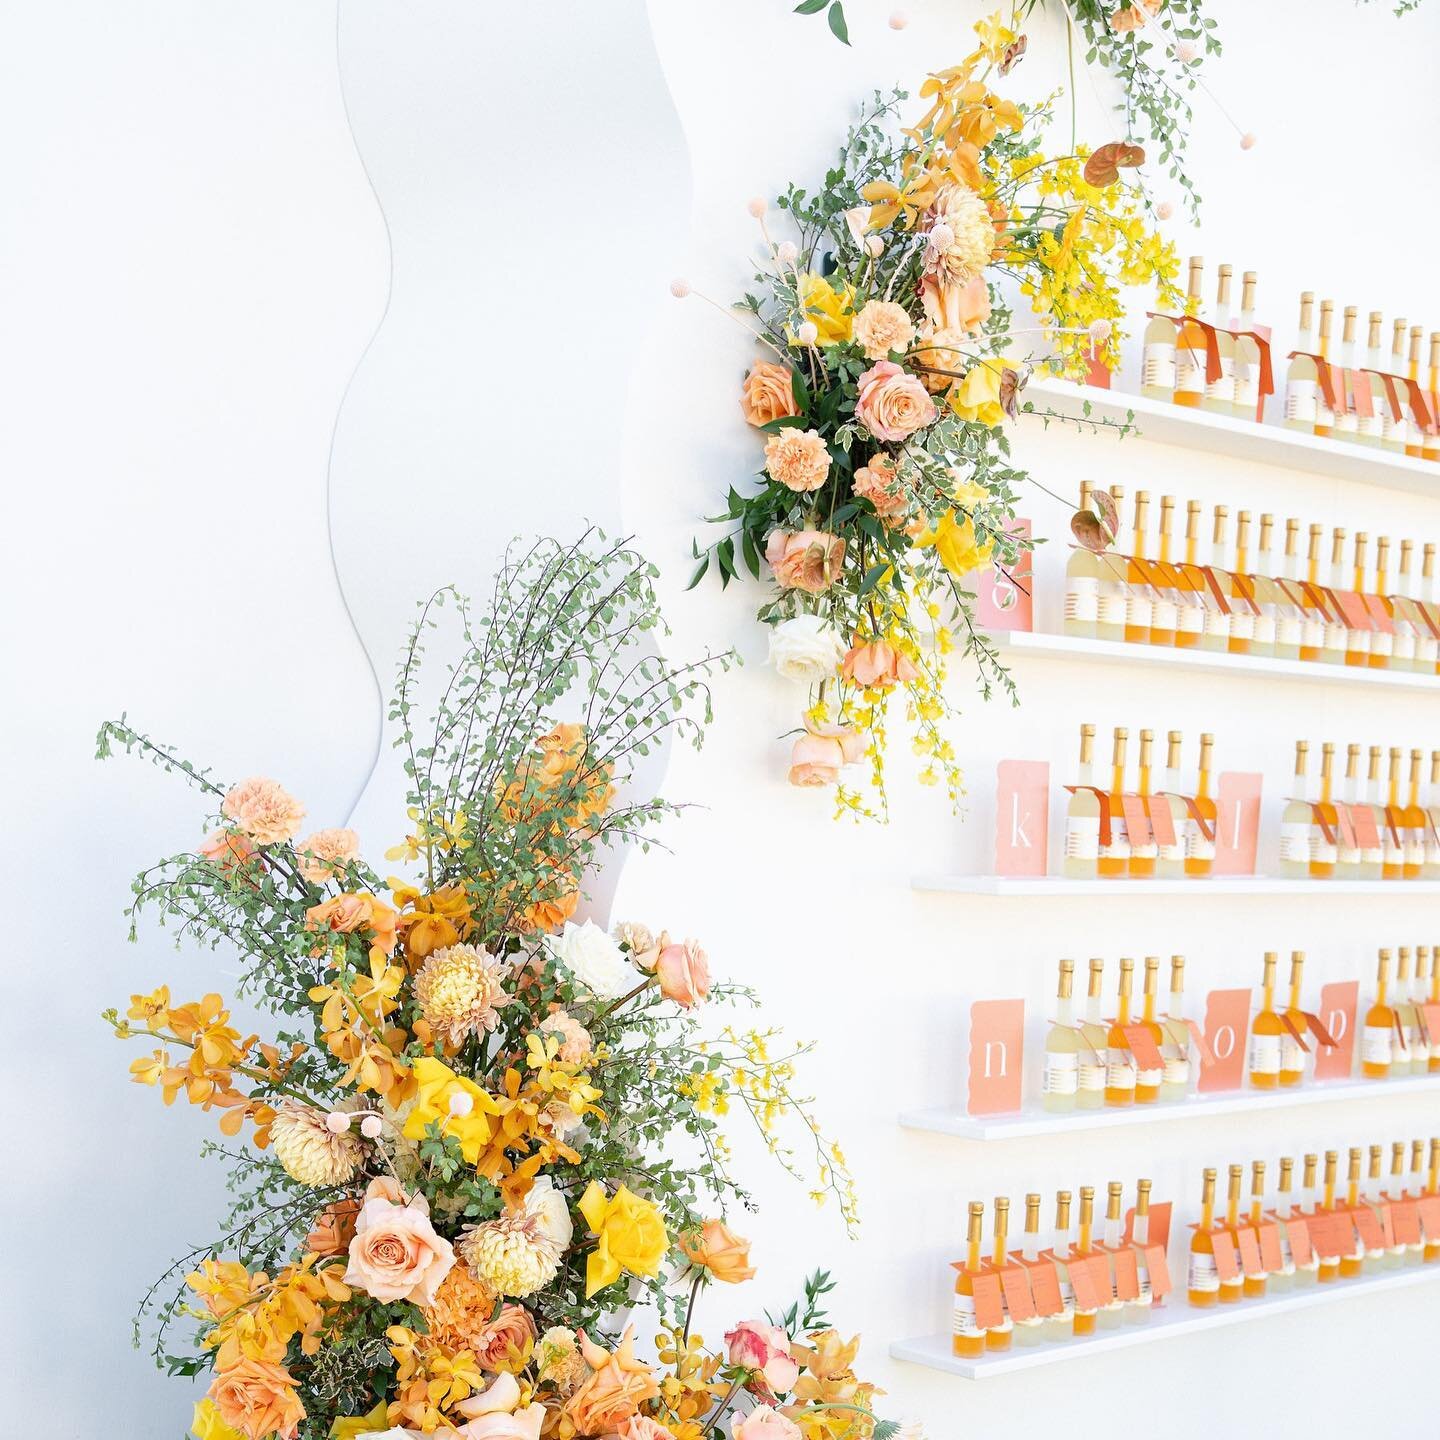 🧡💛 CIN CIN 💛🧡

The most incredible Limoncello wall design by and built for the talented team at @theoriginaleventcompany. 

Spanning 4 meters long this wall boasts enough space for all your favours (all 250 little bottles of delicious limoncello 